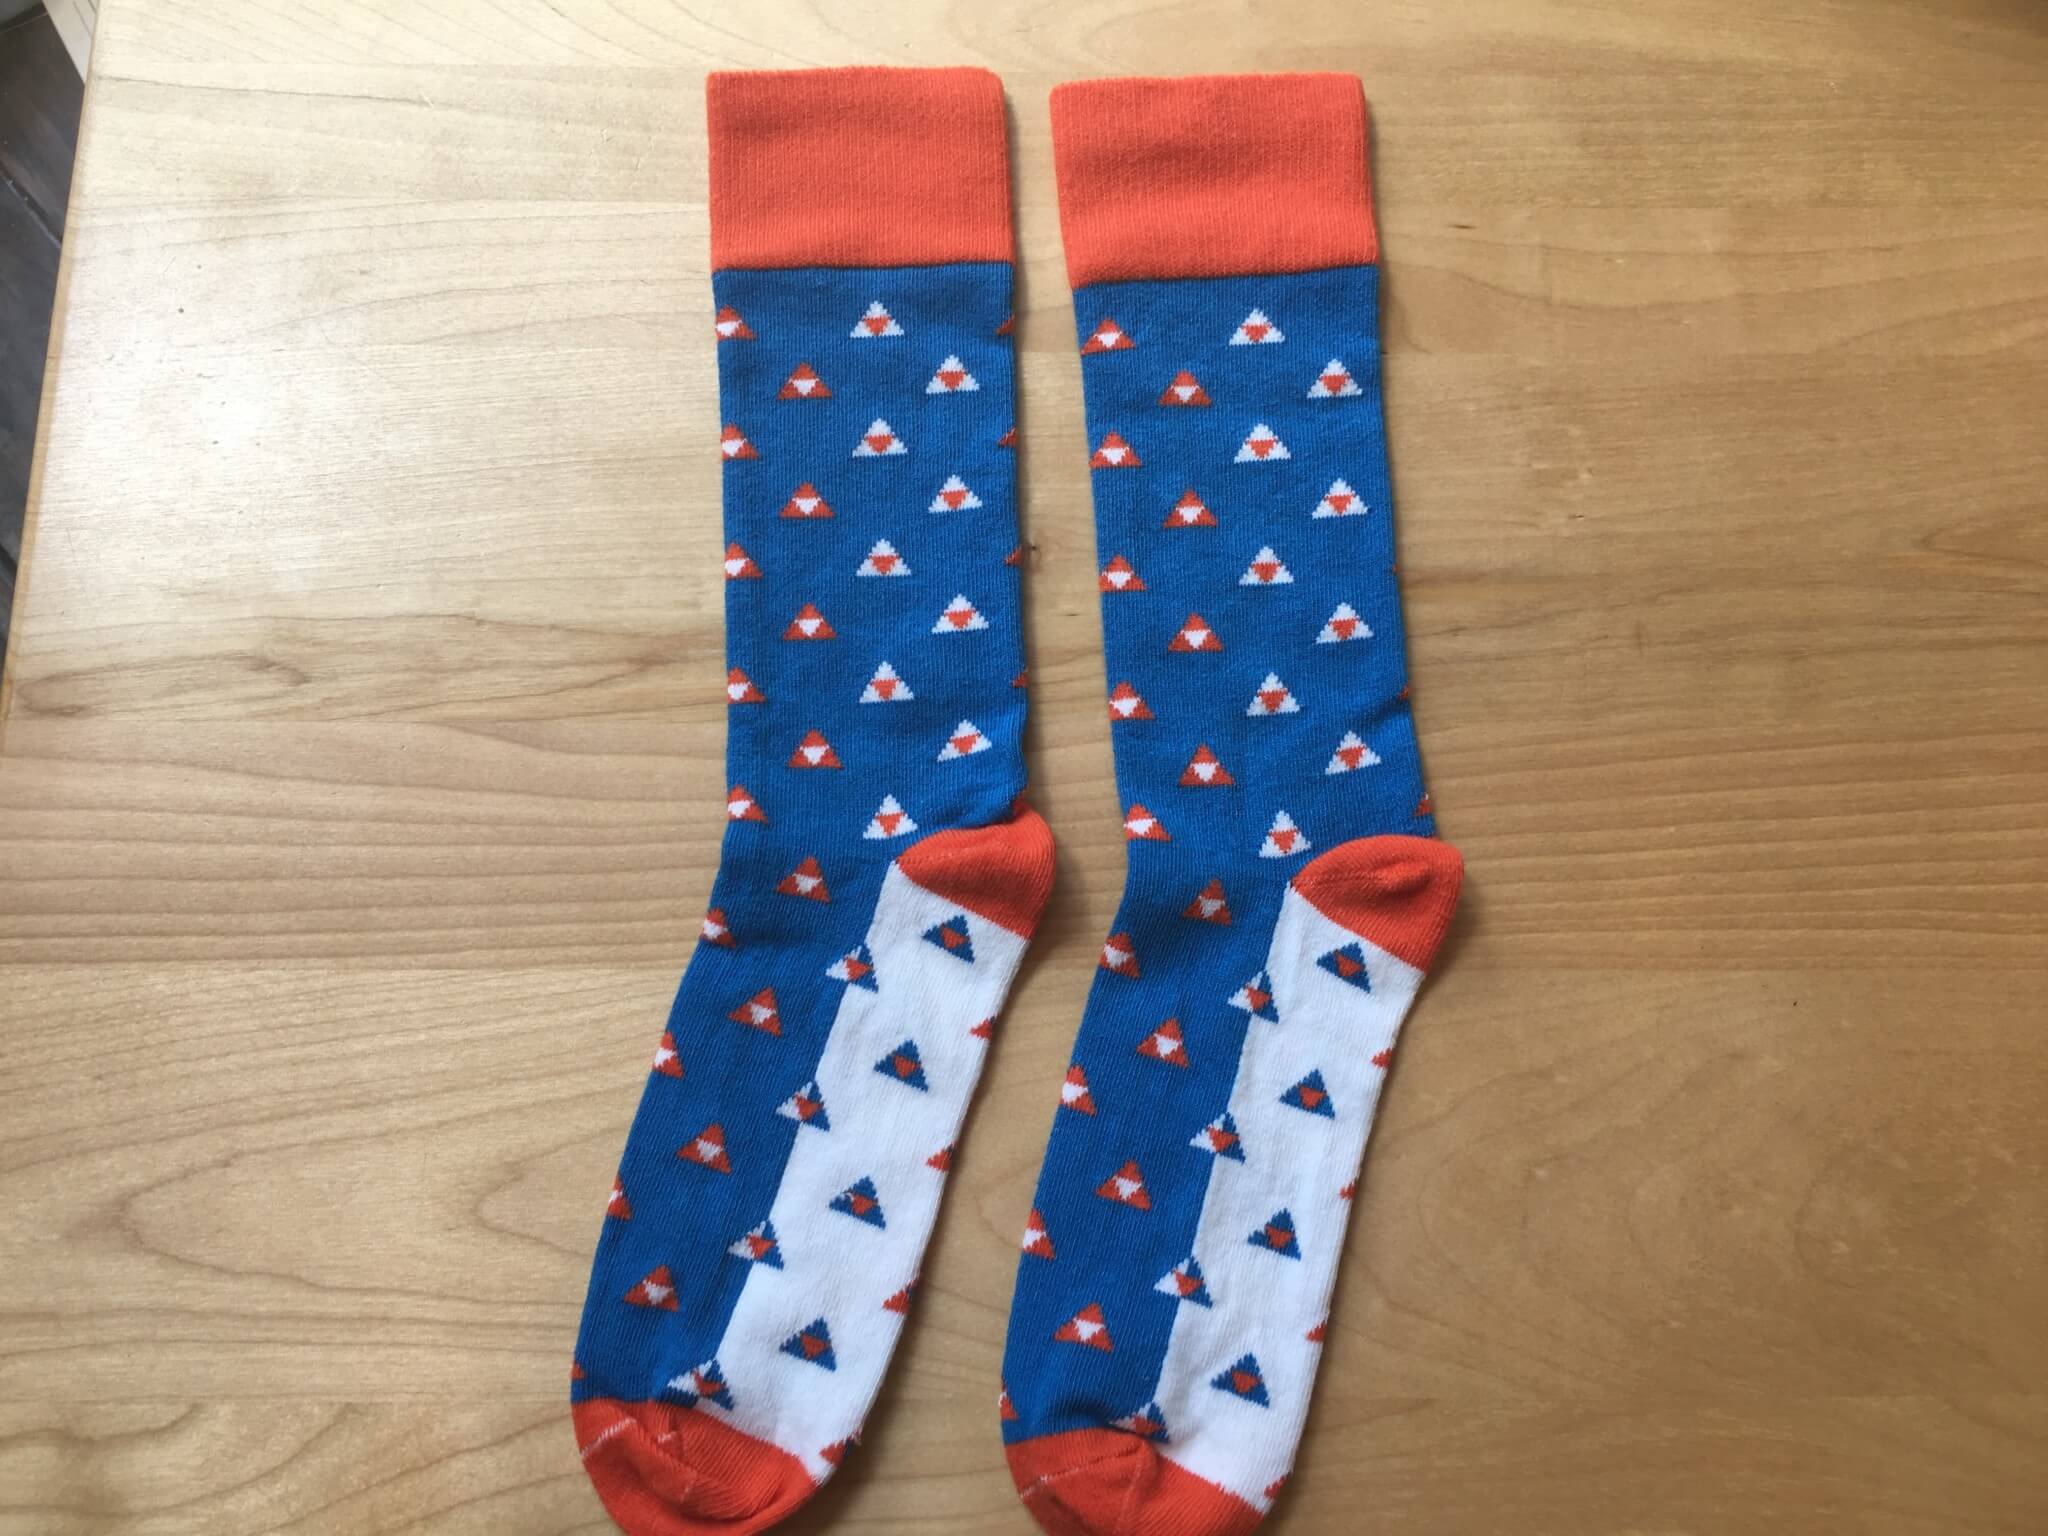 Friendship Socks August 2016 Subscription Box Review - Hello Subscription